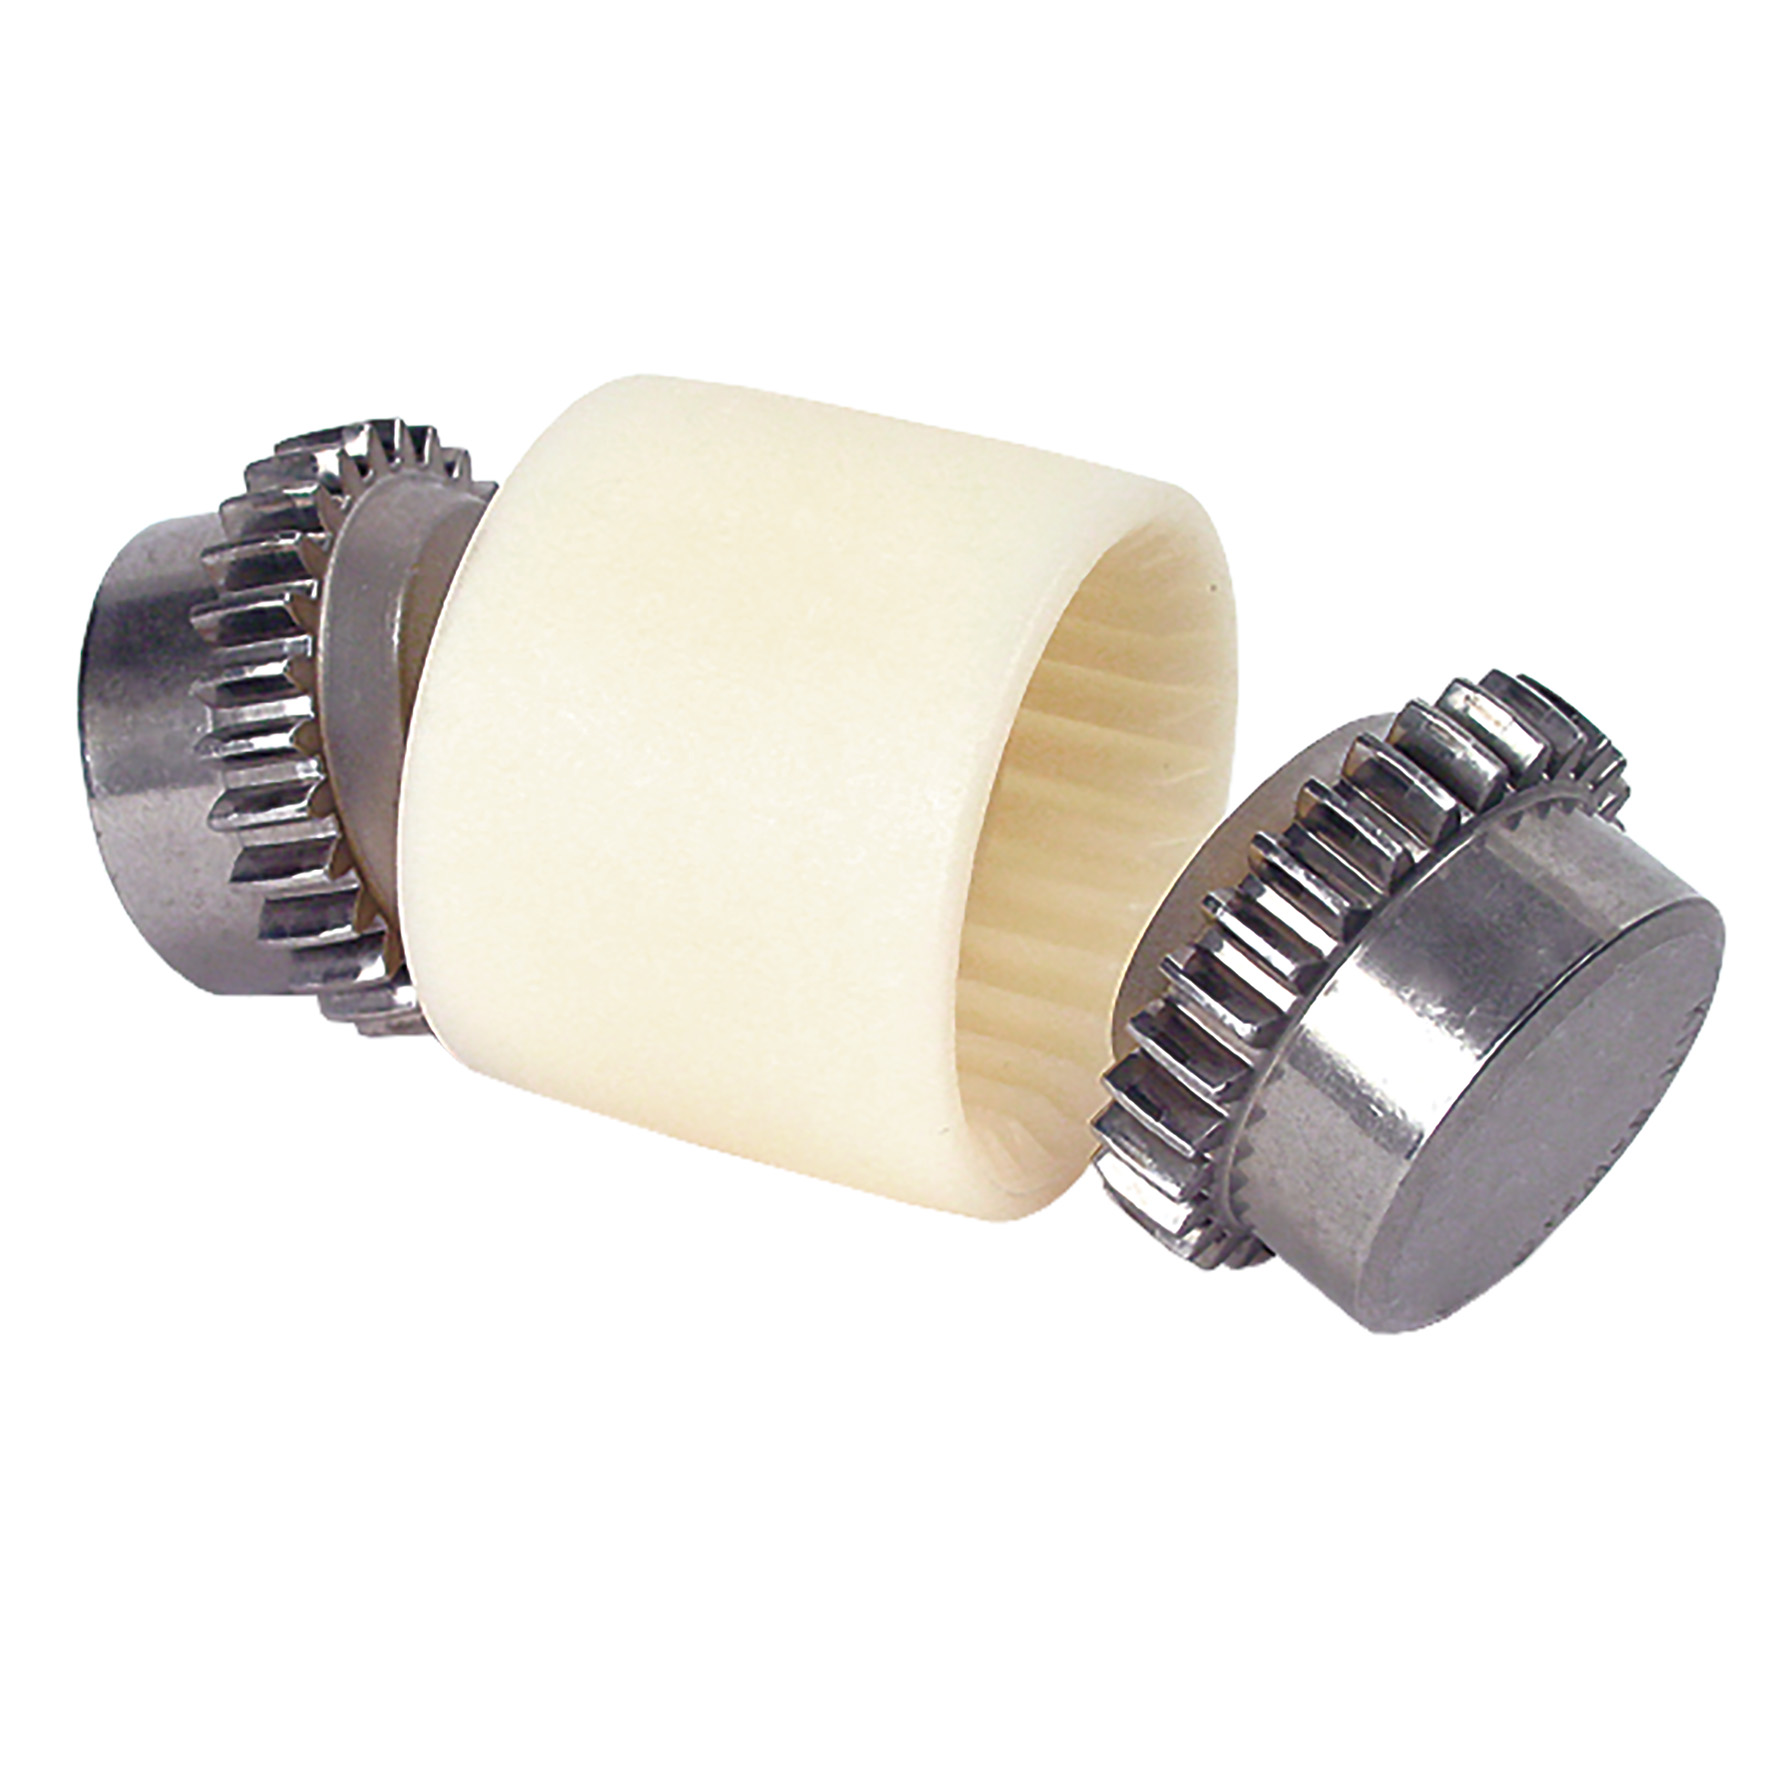 BoWex® curved tooth gear coupling - Nylon and steel -  - 